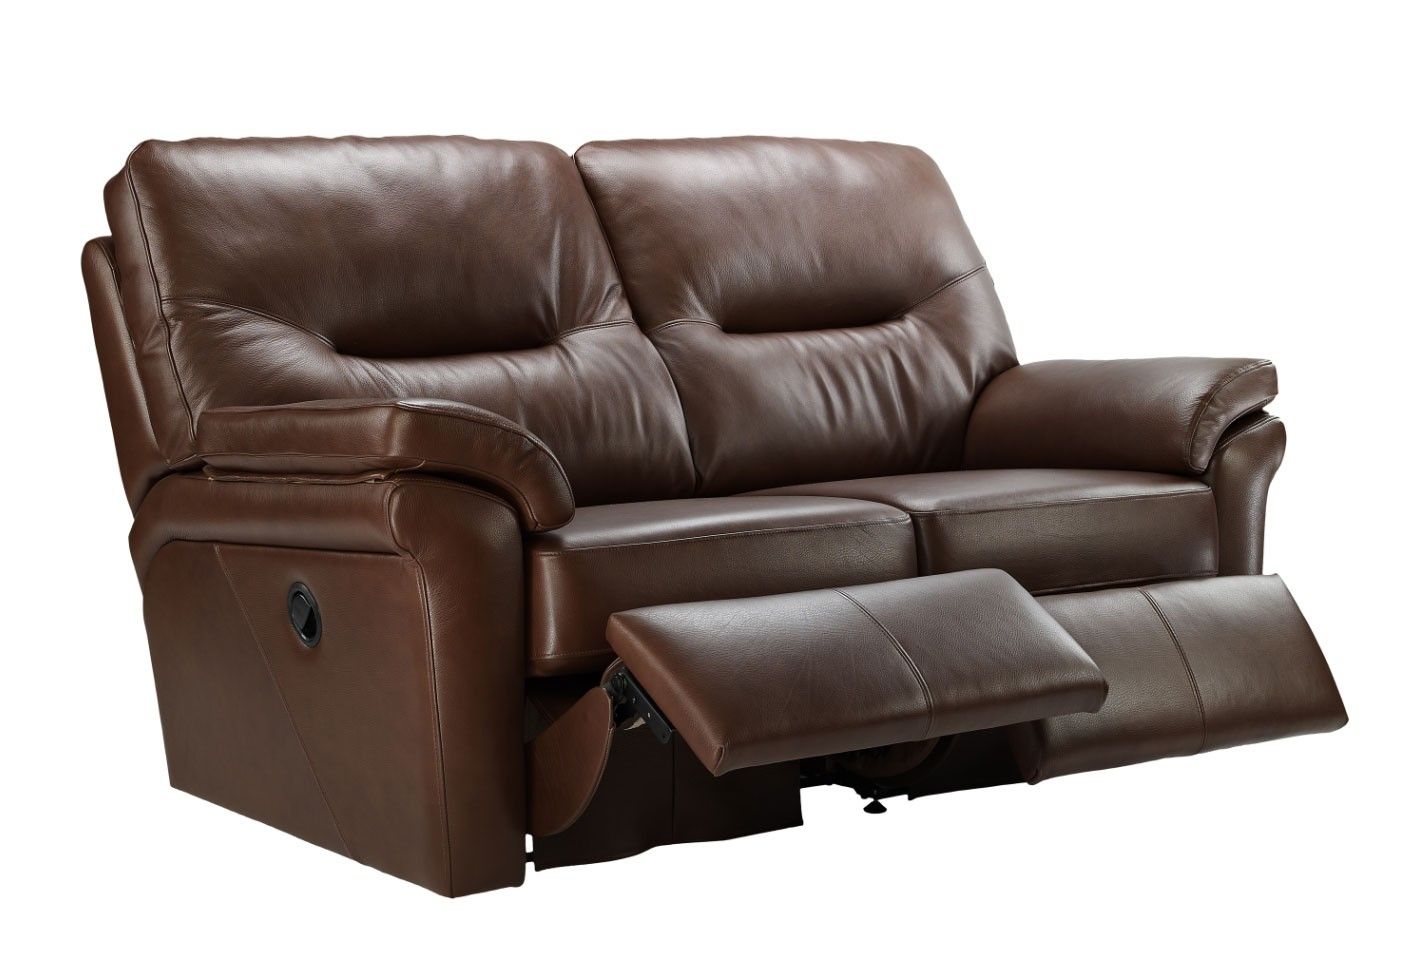 G Plan Washington Leather 2 Seater Double Recliner Sofa | Tr Hayes Intended For Recliner Sofas (View 2 of 10)